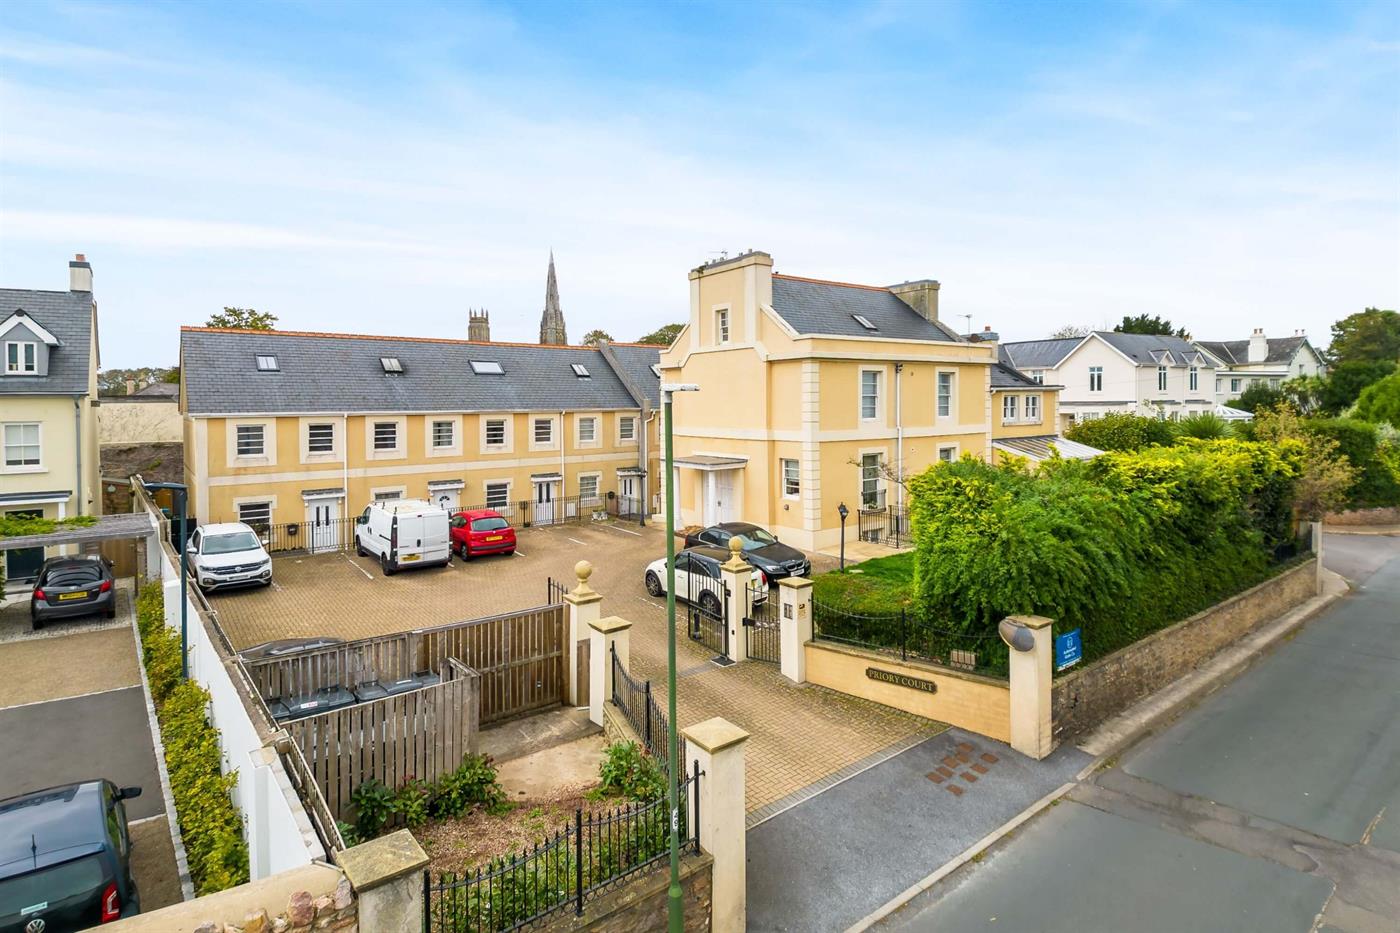 1 Bedroom Apartment for Sale: Priory Court,  St. Marychurch Road, Torquay, TQ1 3JT